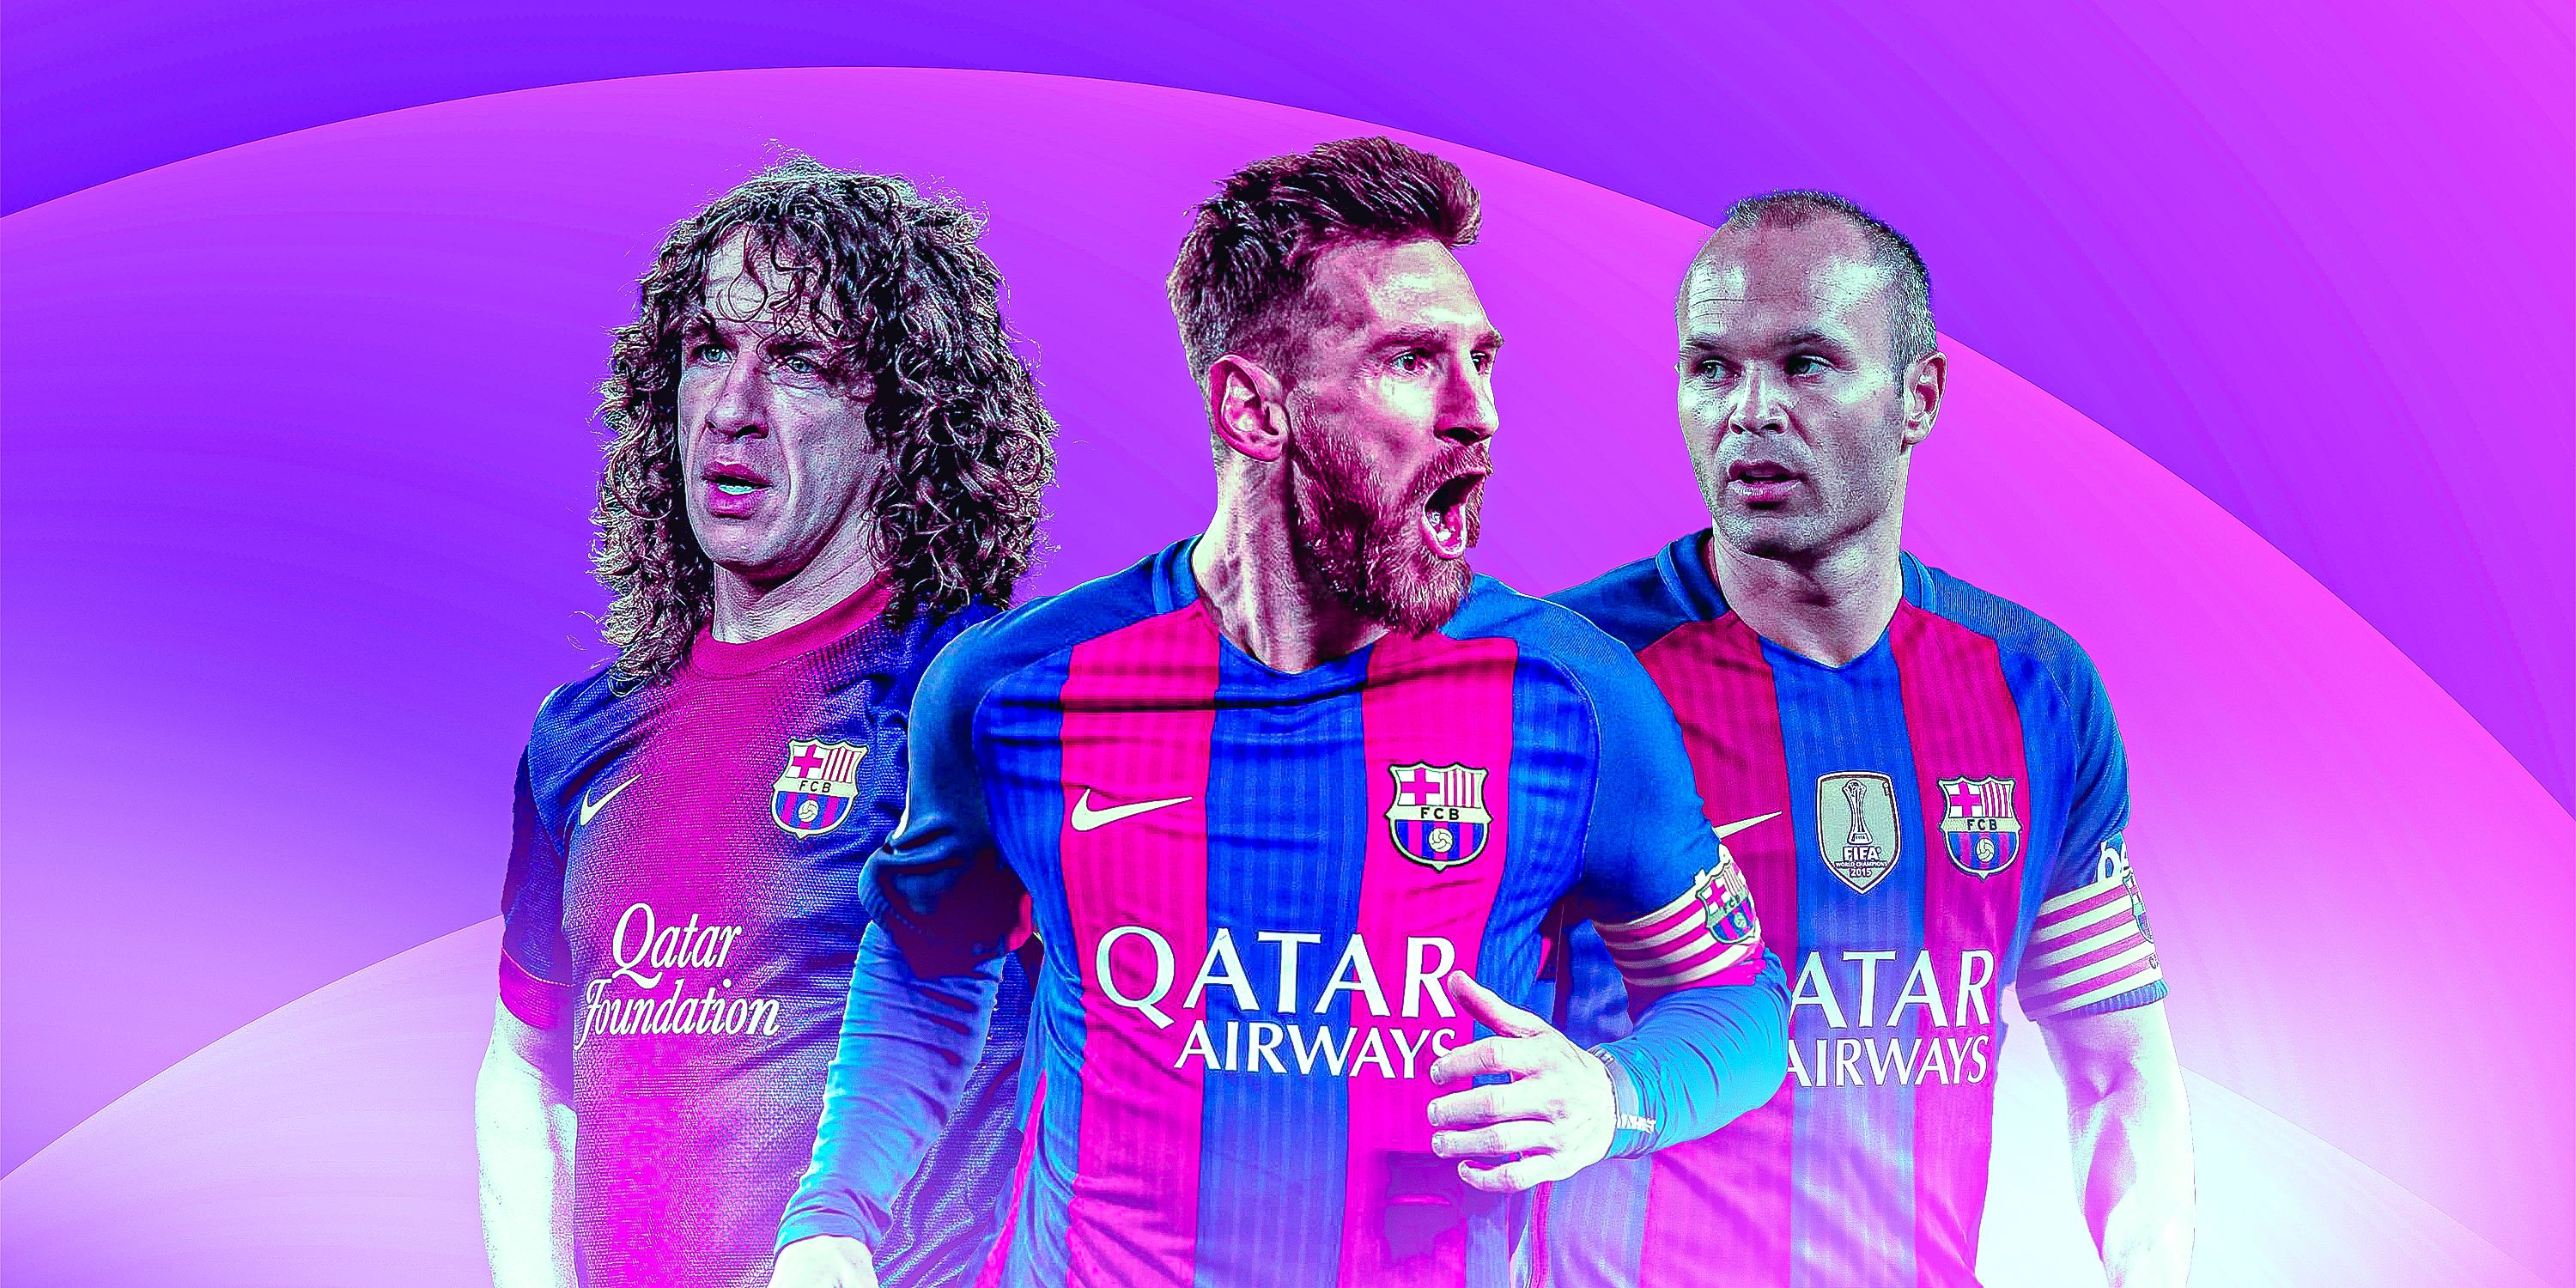 Carles Puyol, Lionel Messi, and Andres Iniesta of Barcelona.